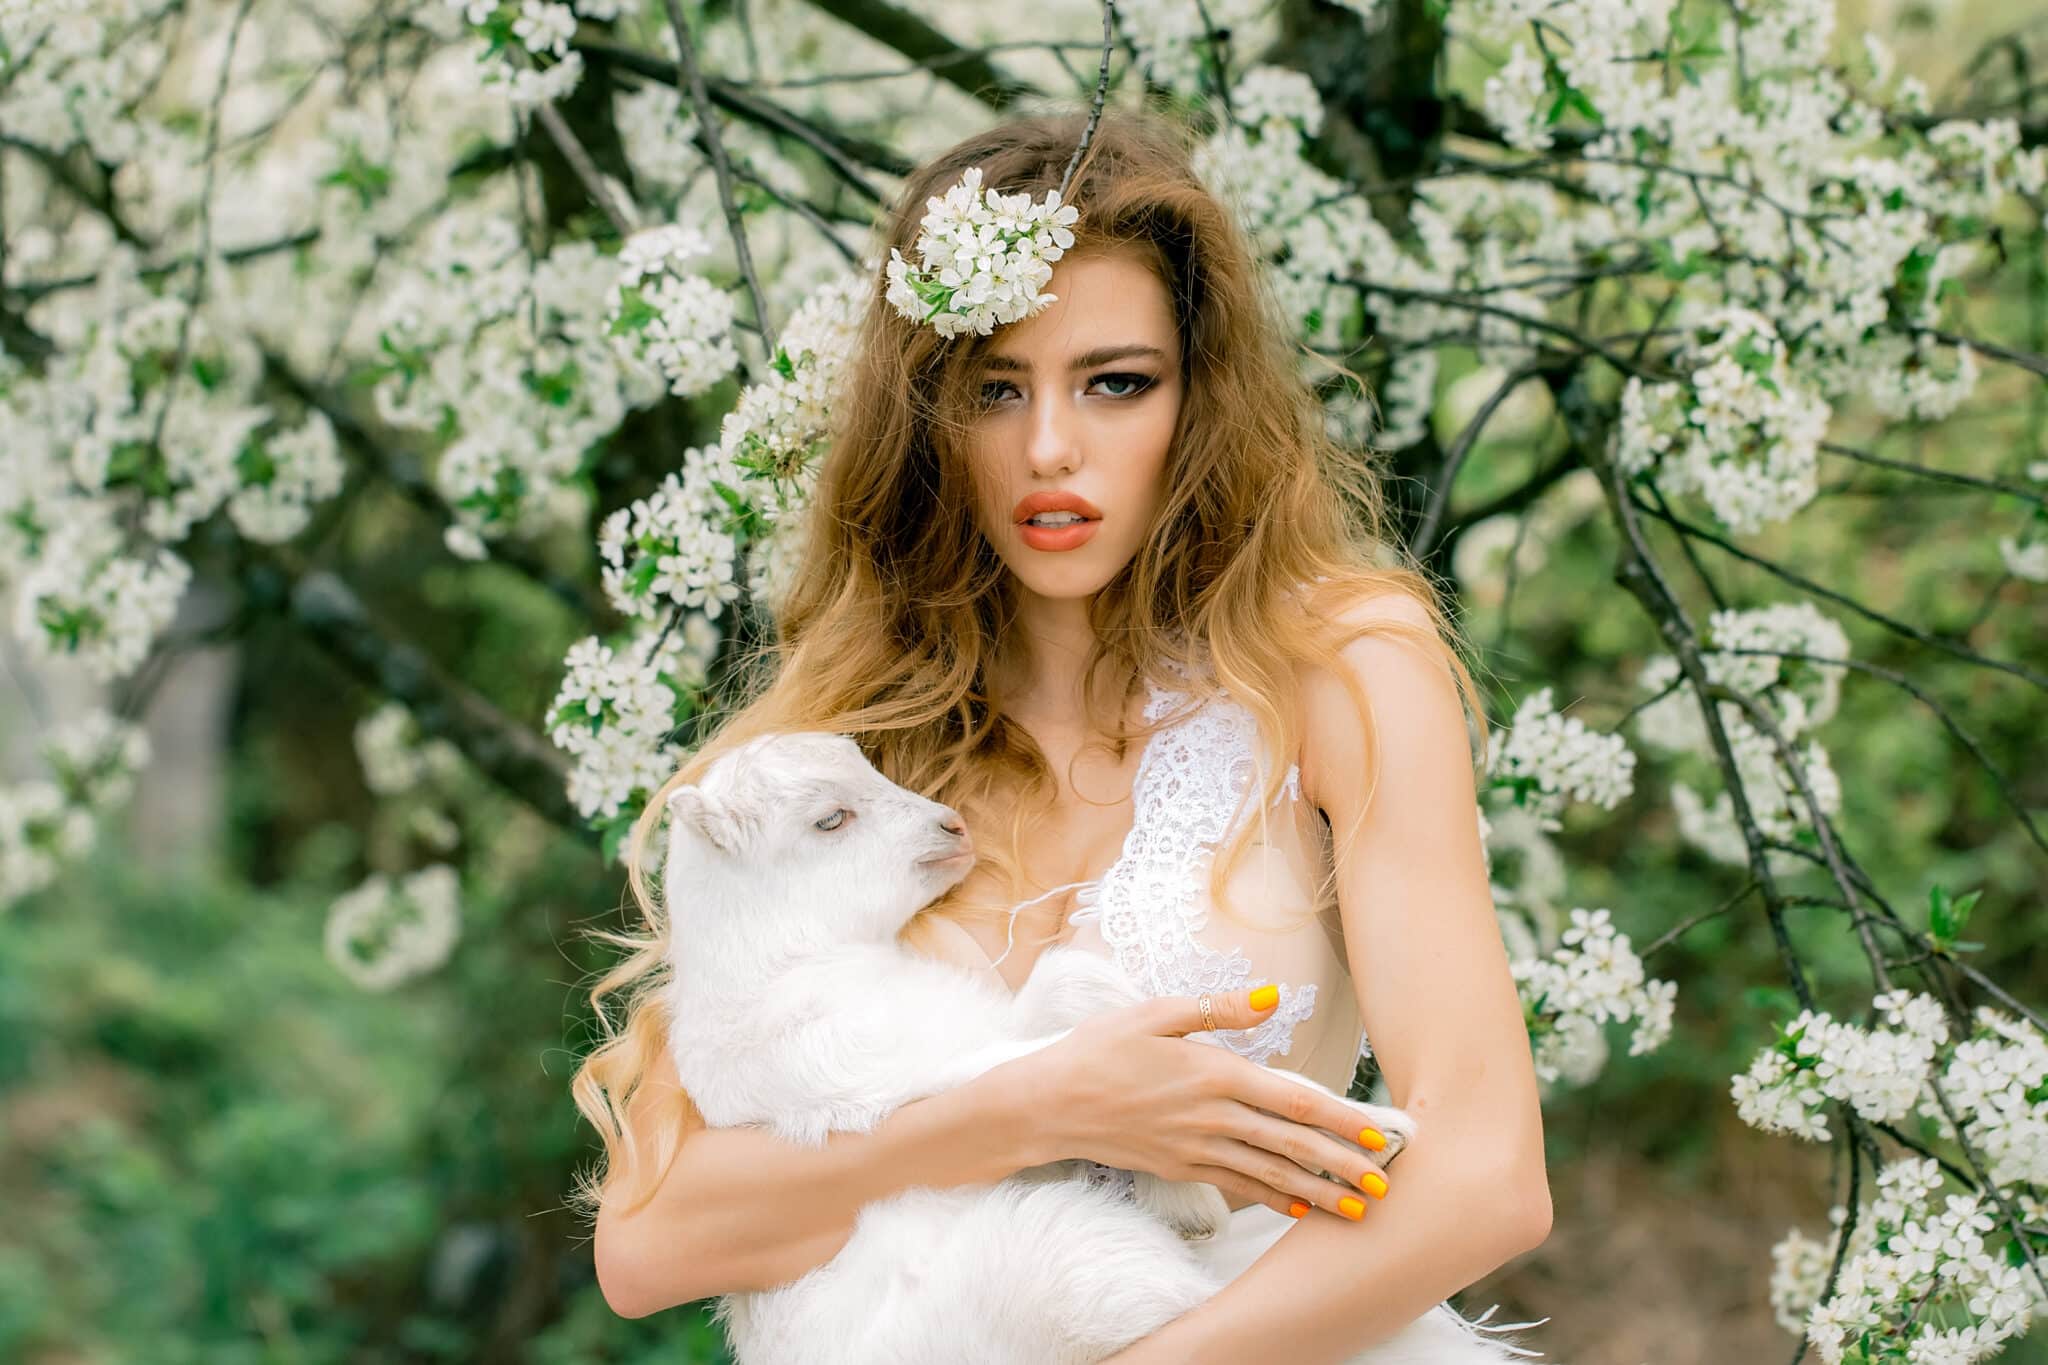 a young beautiful woman holding a small white lamb in spring blooming garden